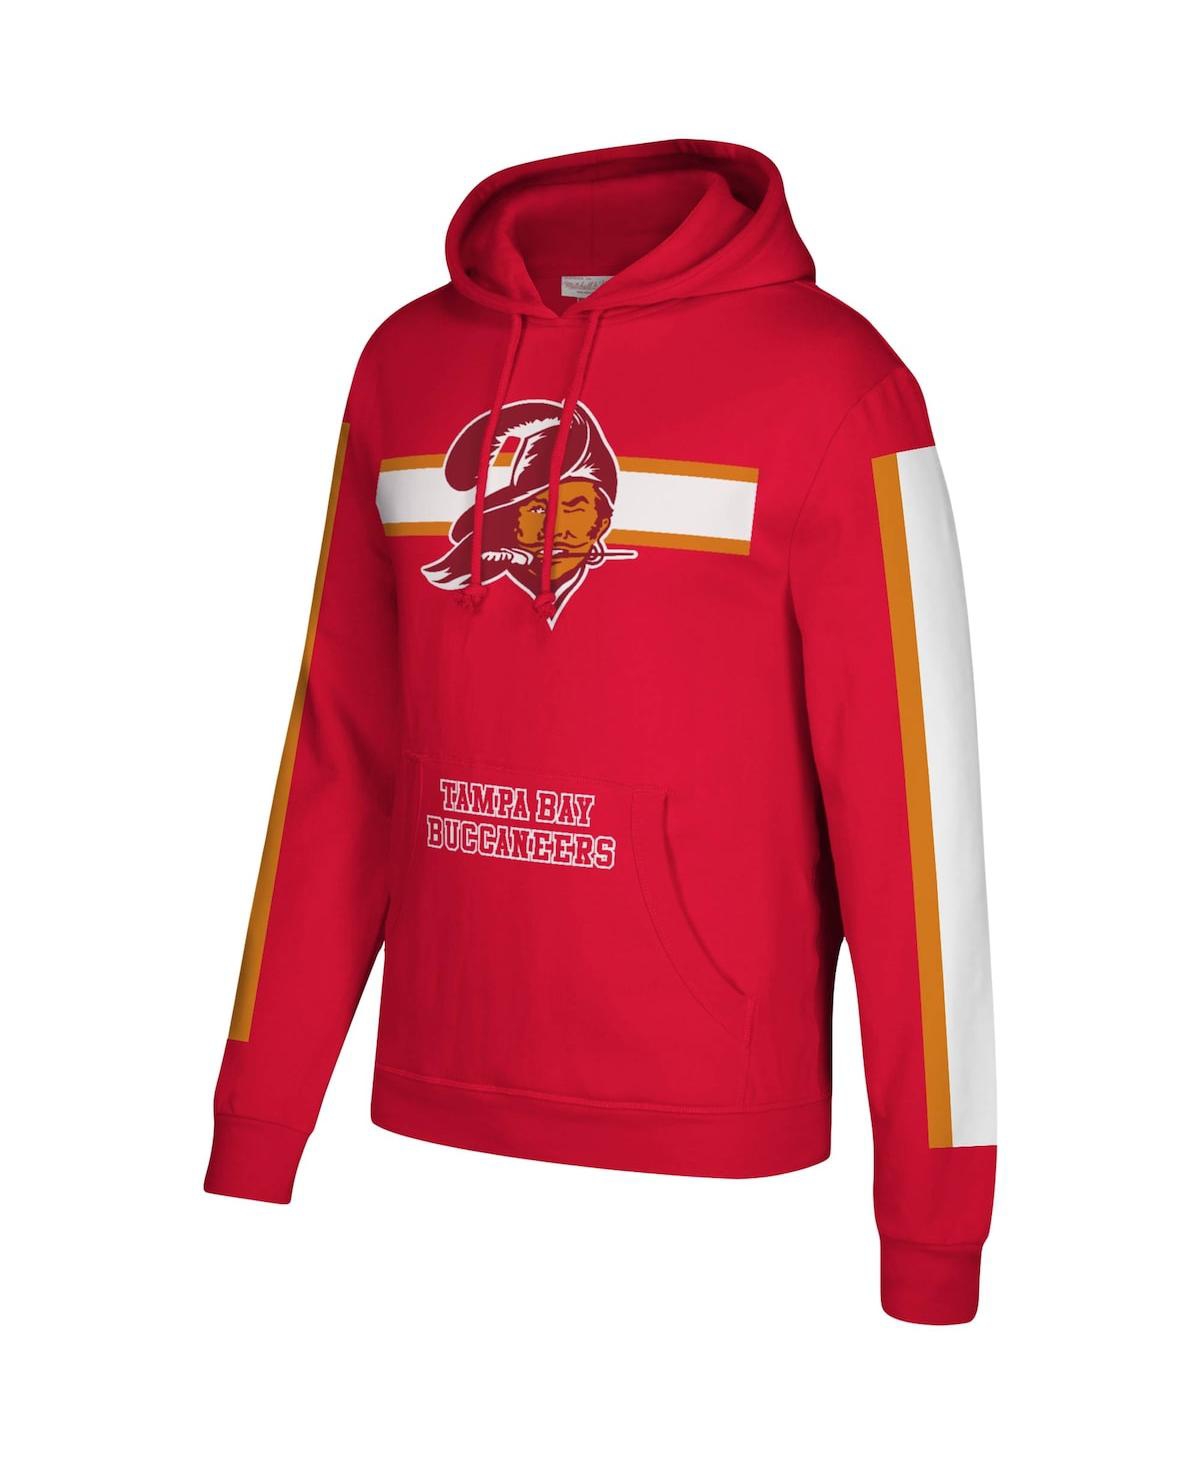 Shop Mitchell & Ness Men's Red Tampa Bay Buccaneers Three Stripe Pullover Hoodie